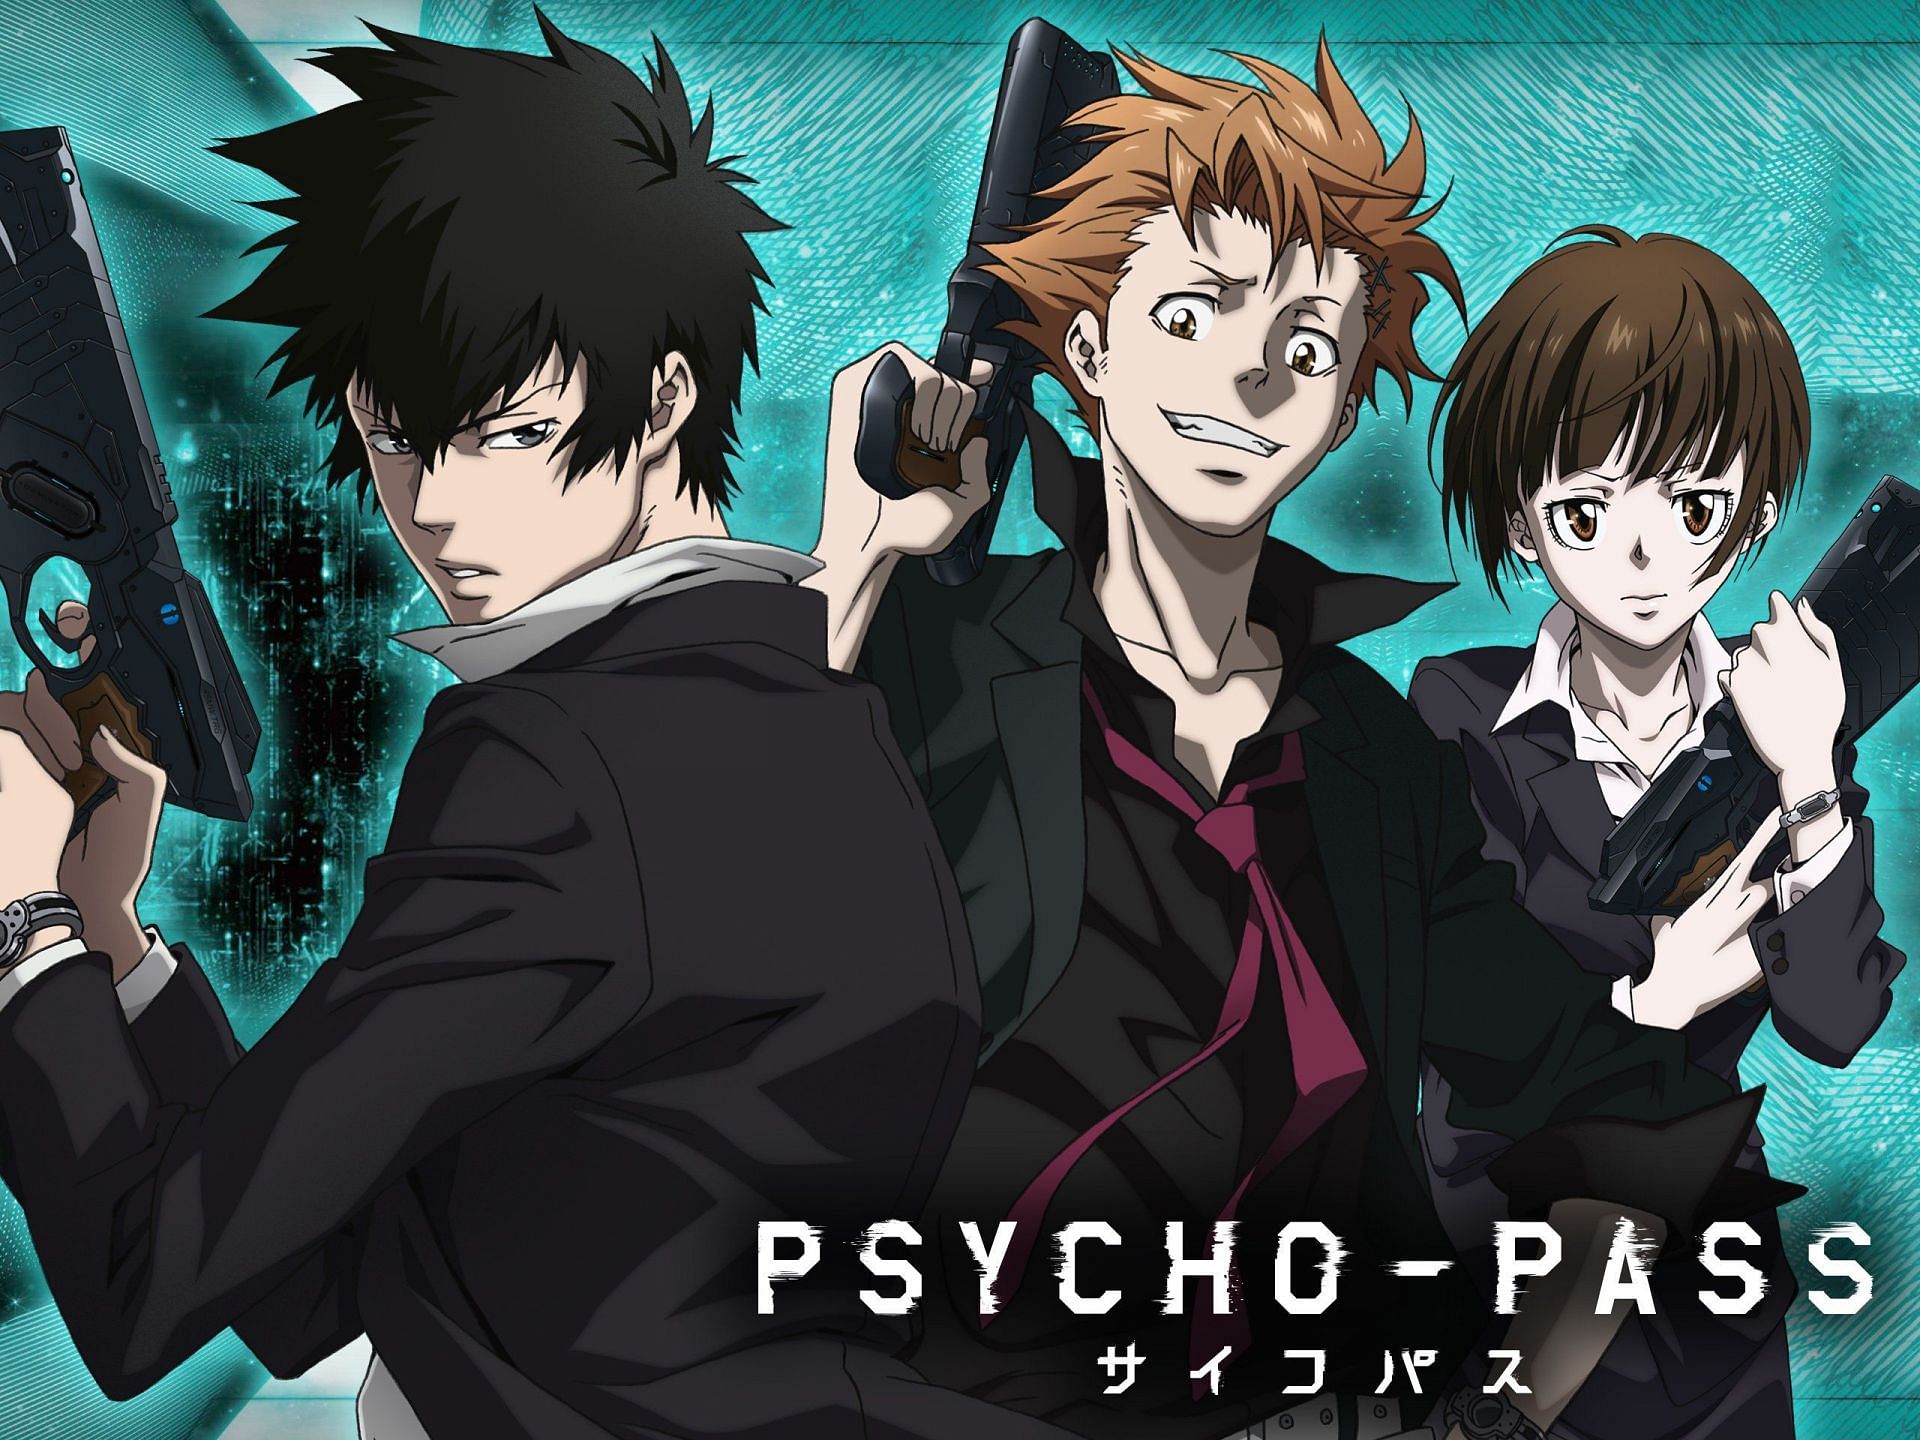 Psycho-Pass DVD cover / Main characters (Image via Production IG)